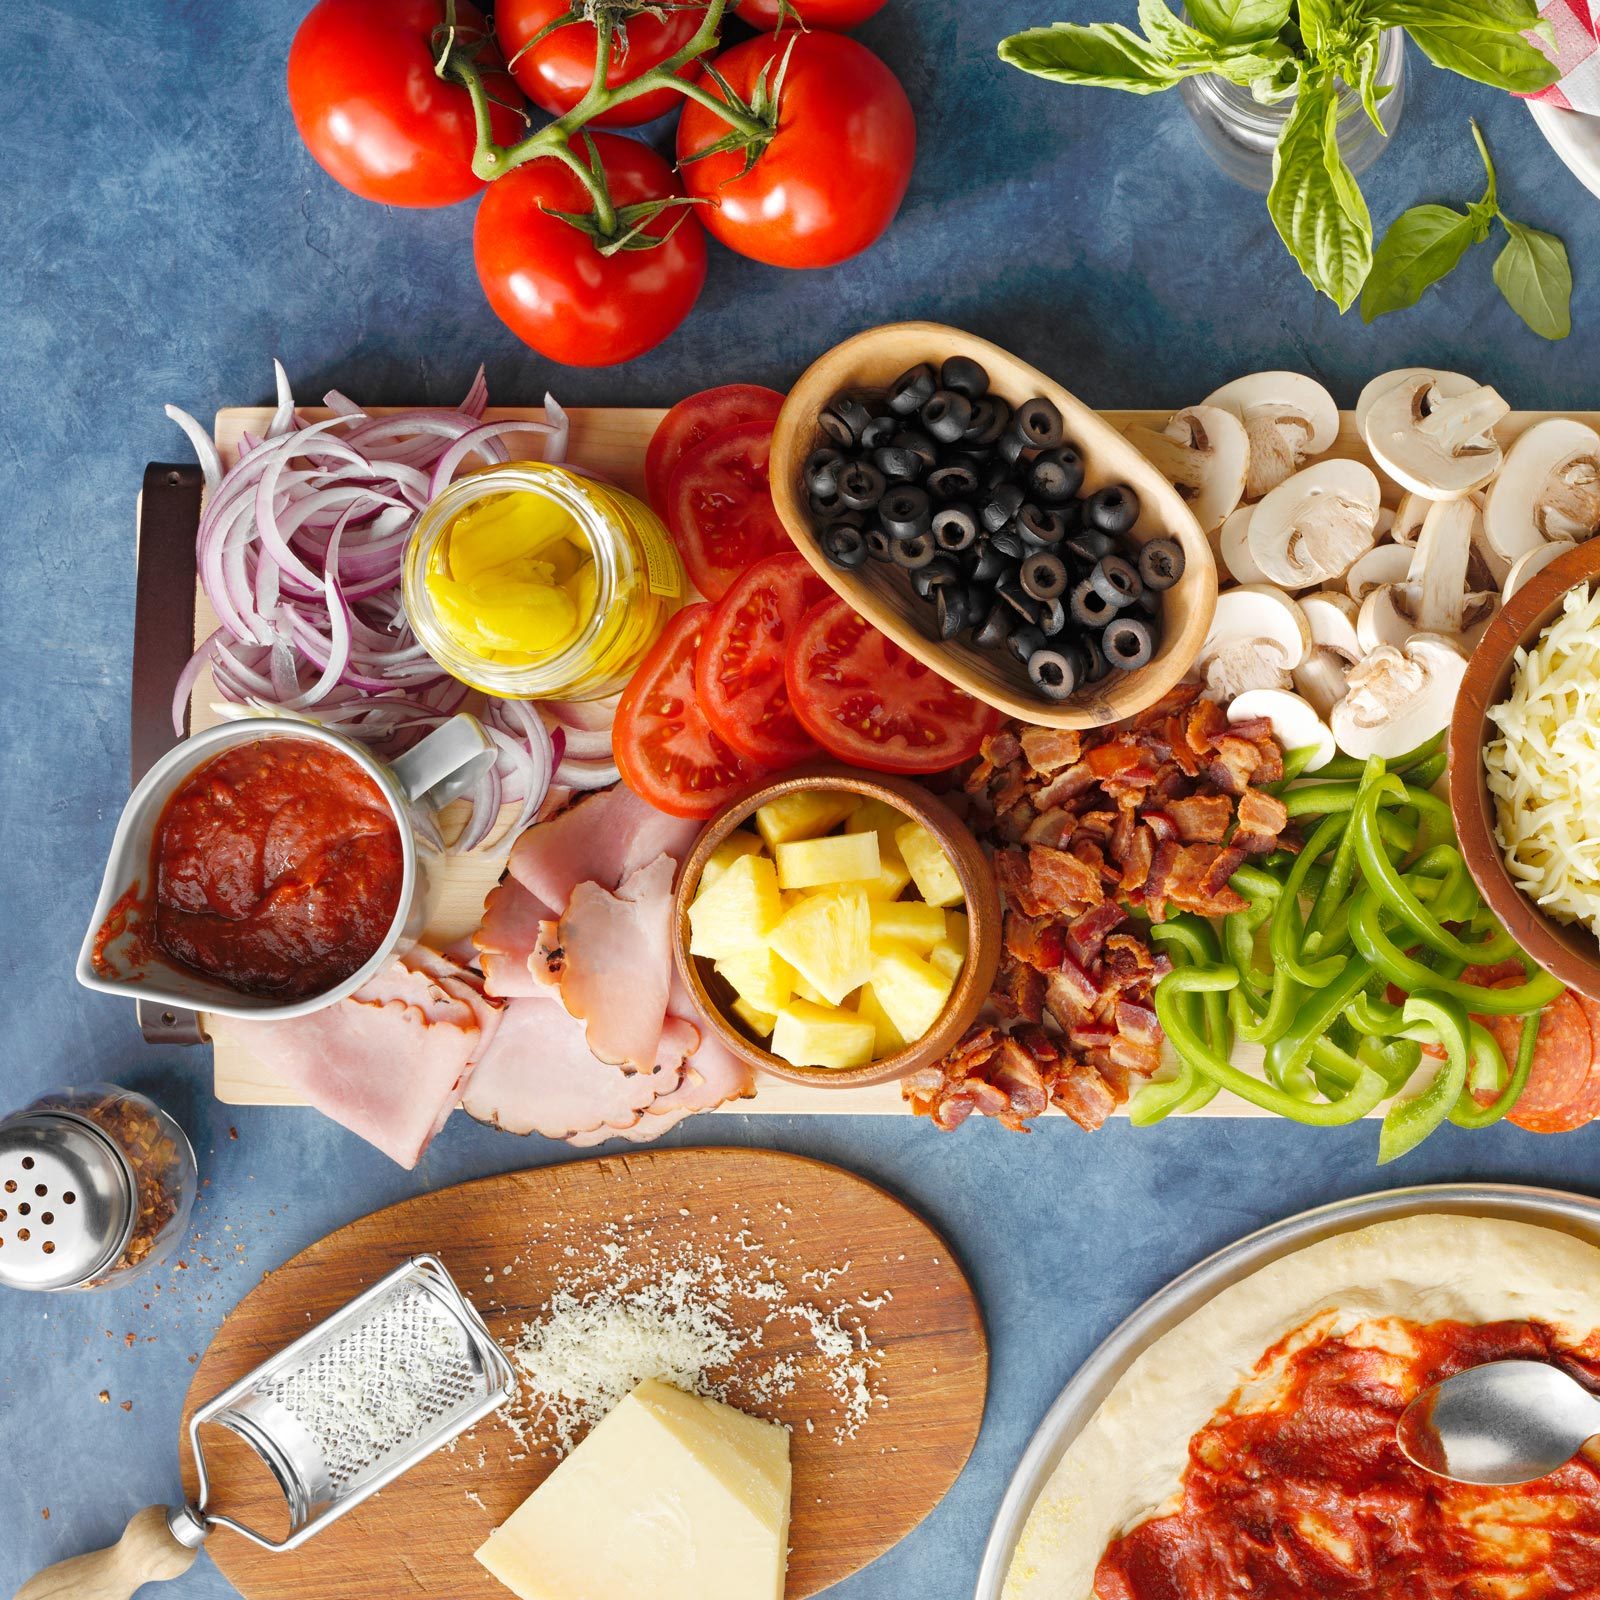 make your own pizza themed charcuterie board